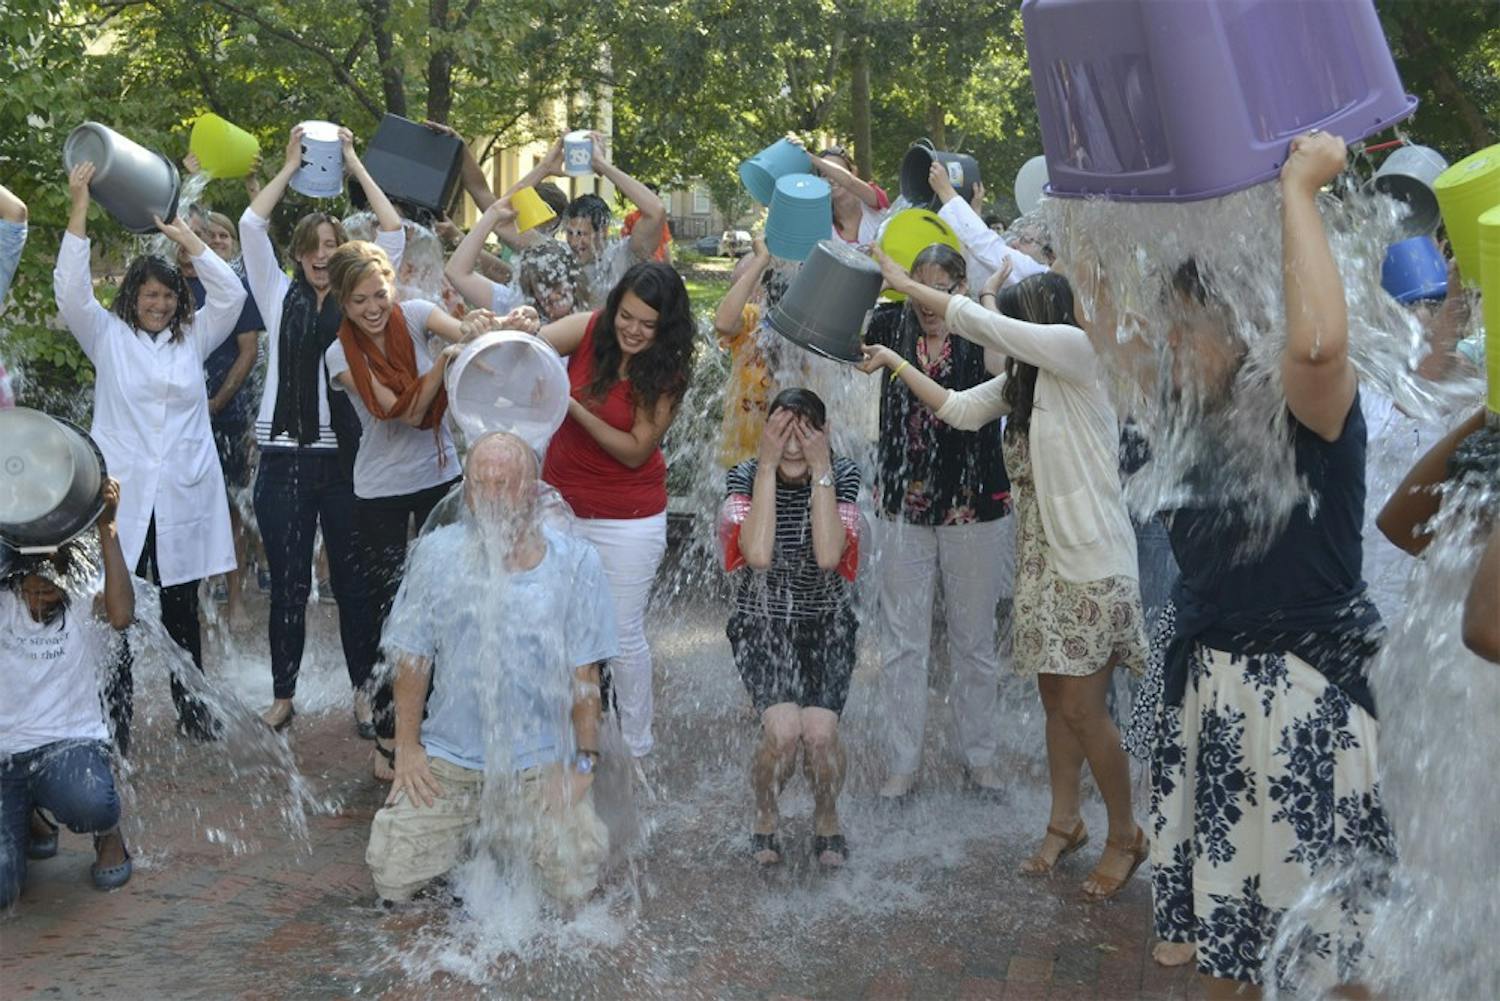 Individuals come together Wednesday afternoon outside of Davie Hall to complete the ALS ice bucket challenge in honor of a psychology professor who was recently diagnosed with ALS.